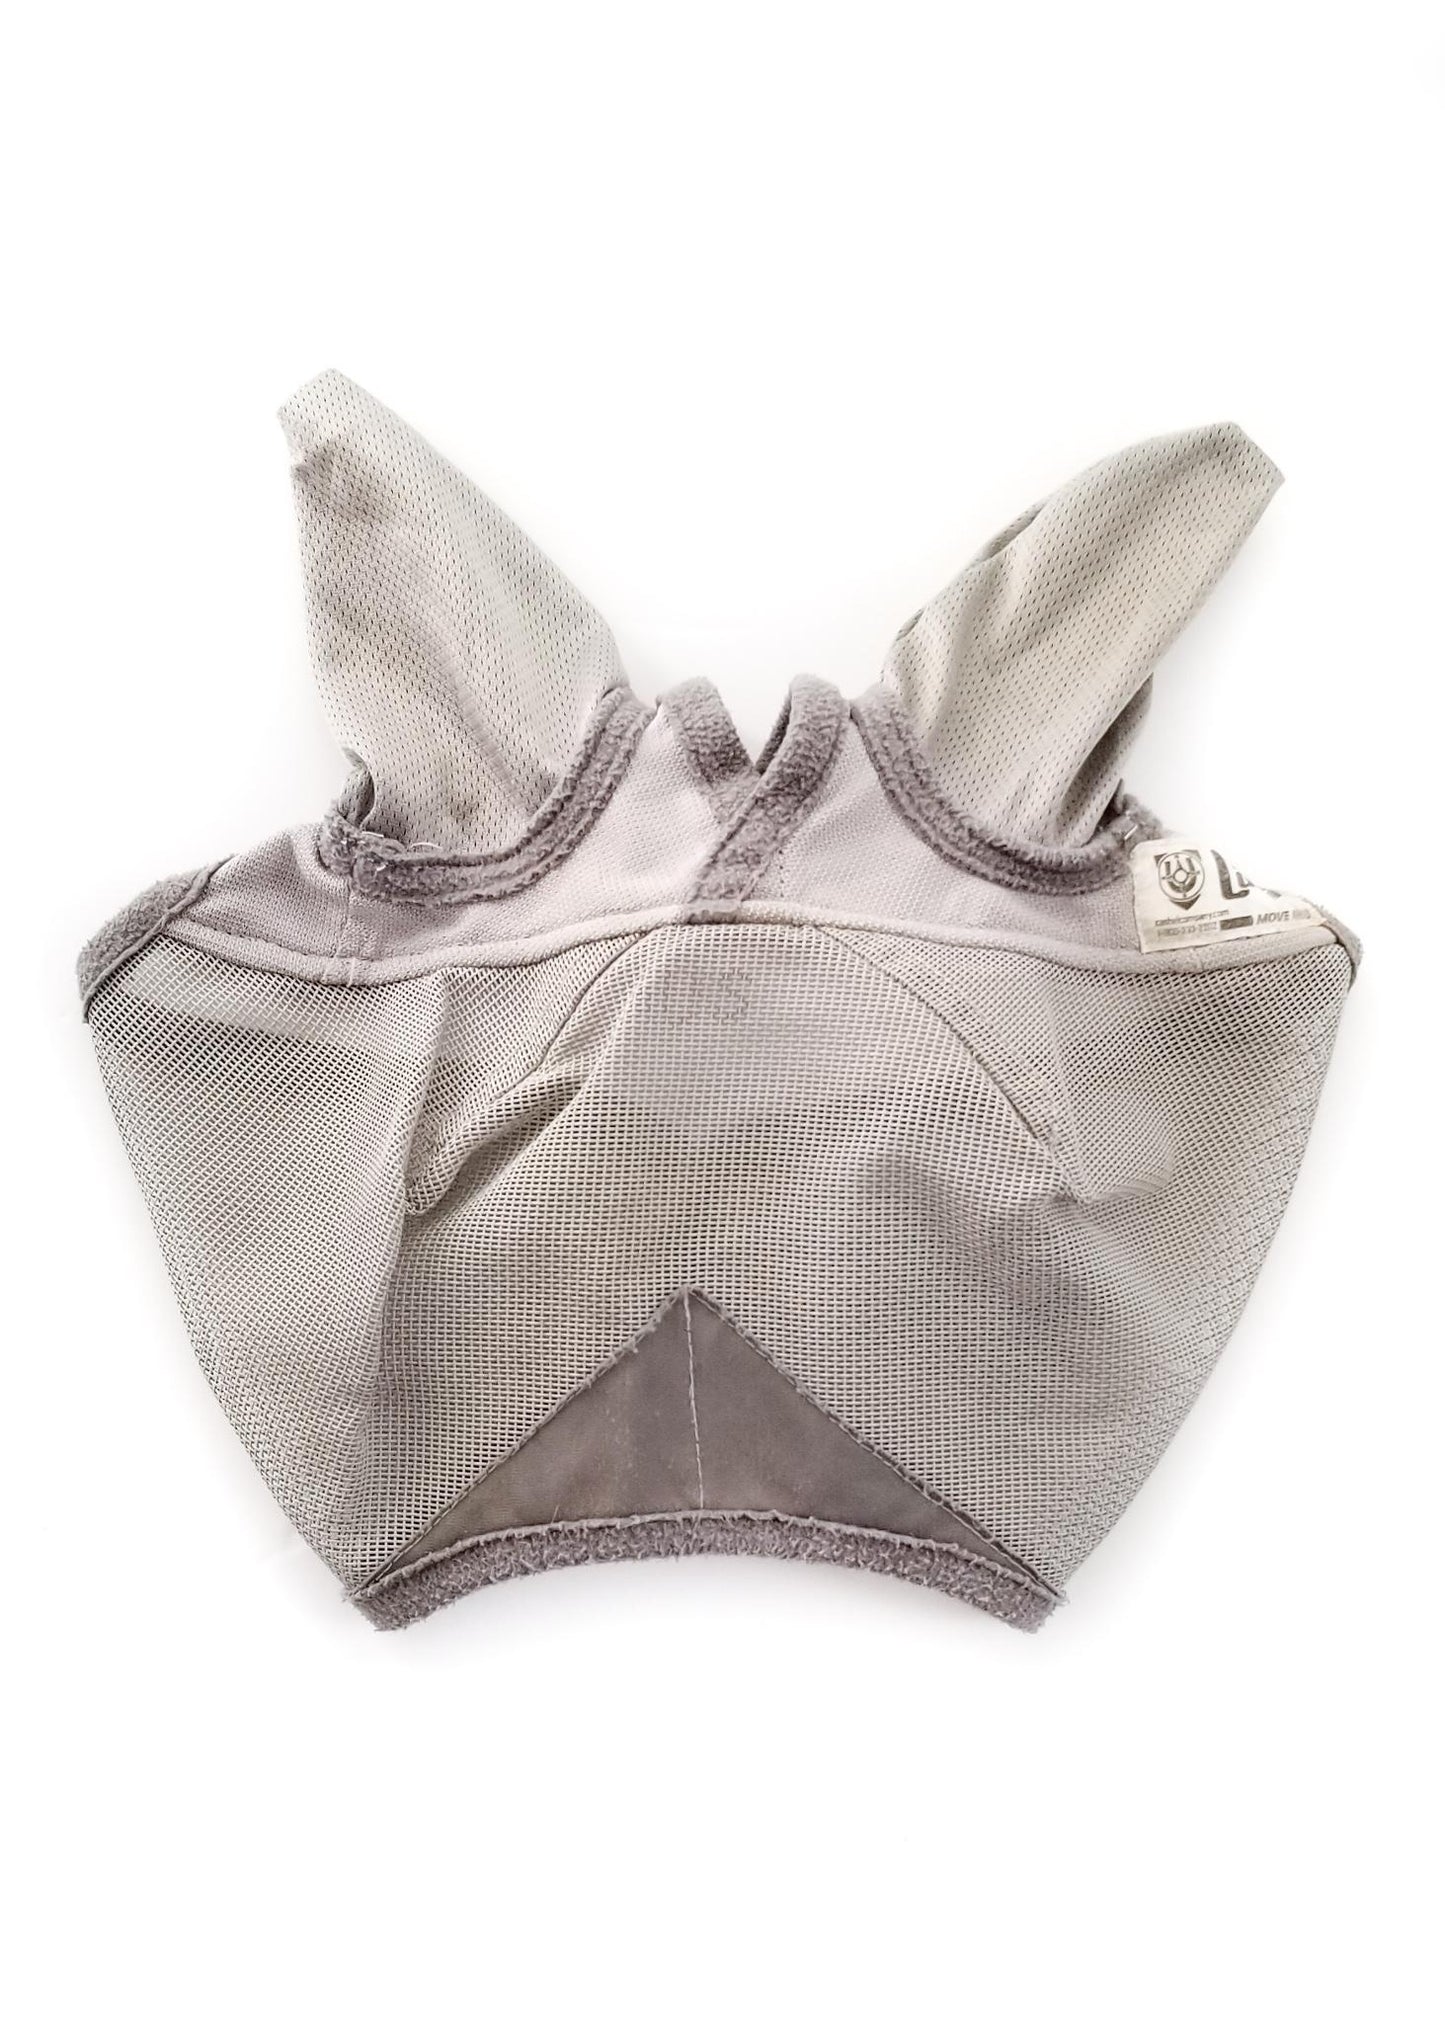 Cashel Crusader Standard Fly Mask with Ears - Grey - Small Pony/Weanling